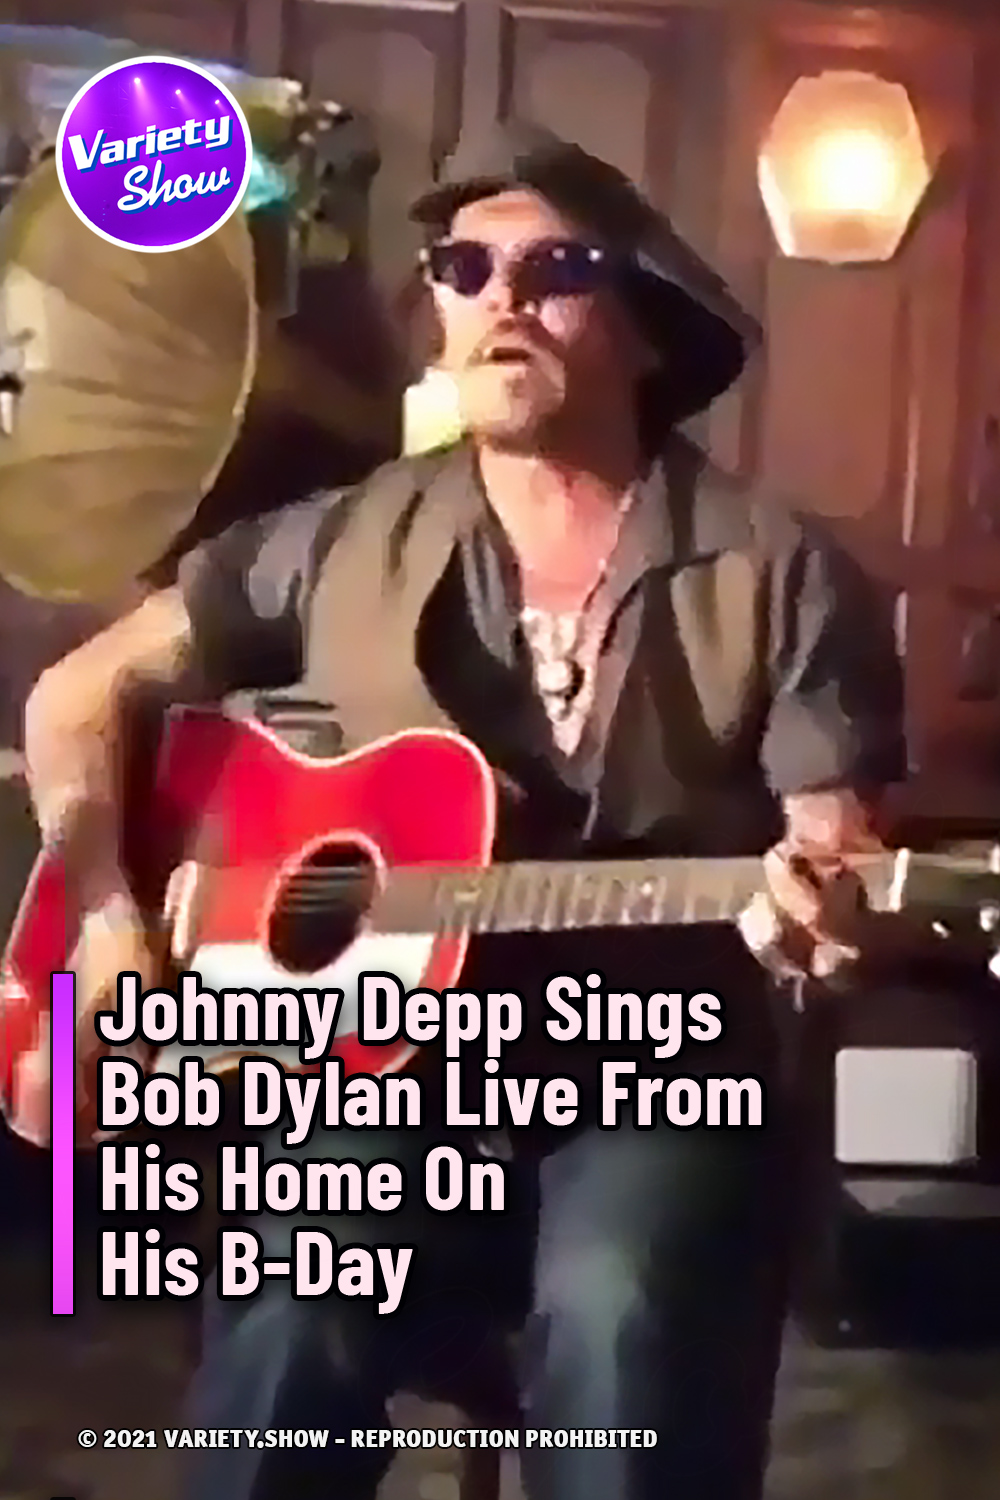 Johnny Depp Sings Bob Dylan Live From His Home On His B-Day